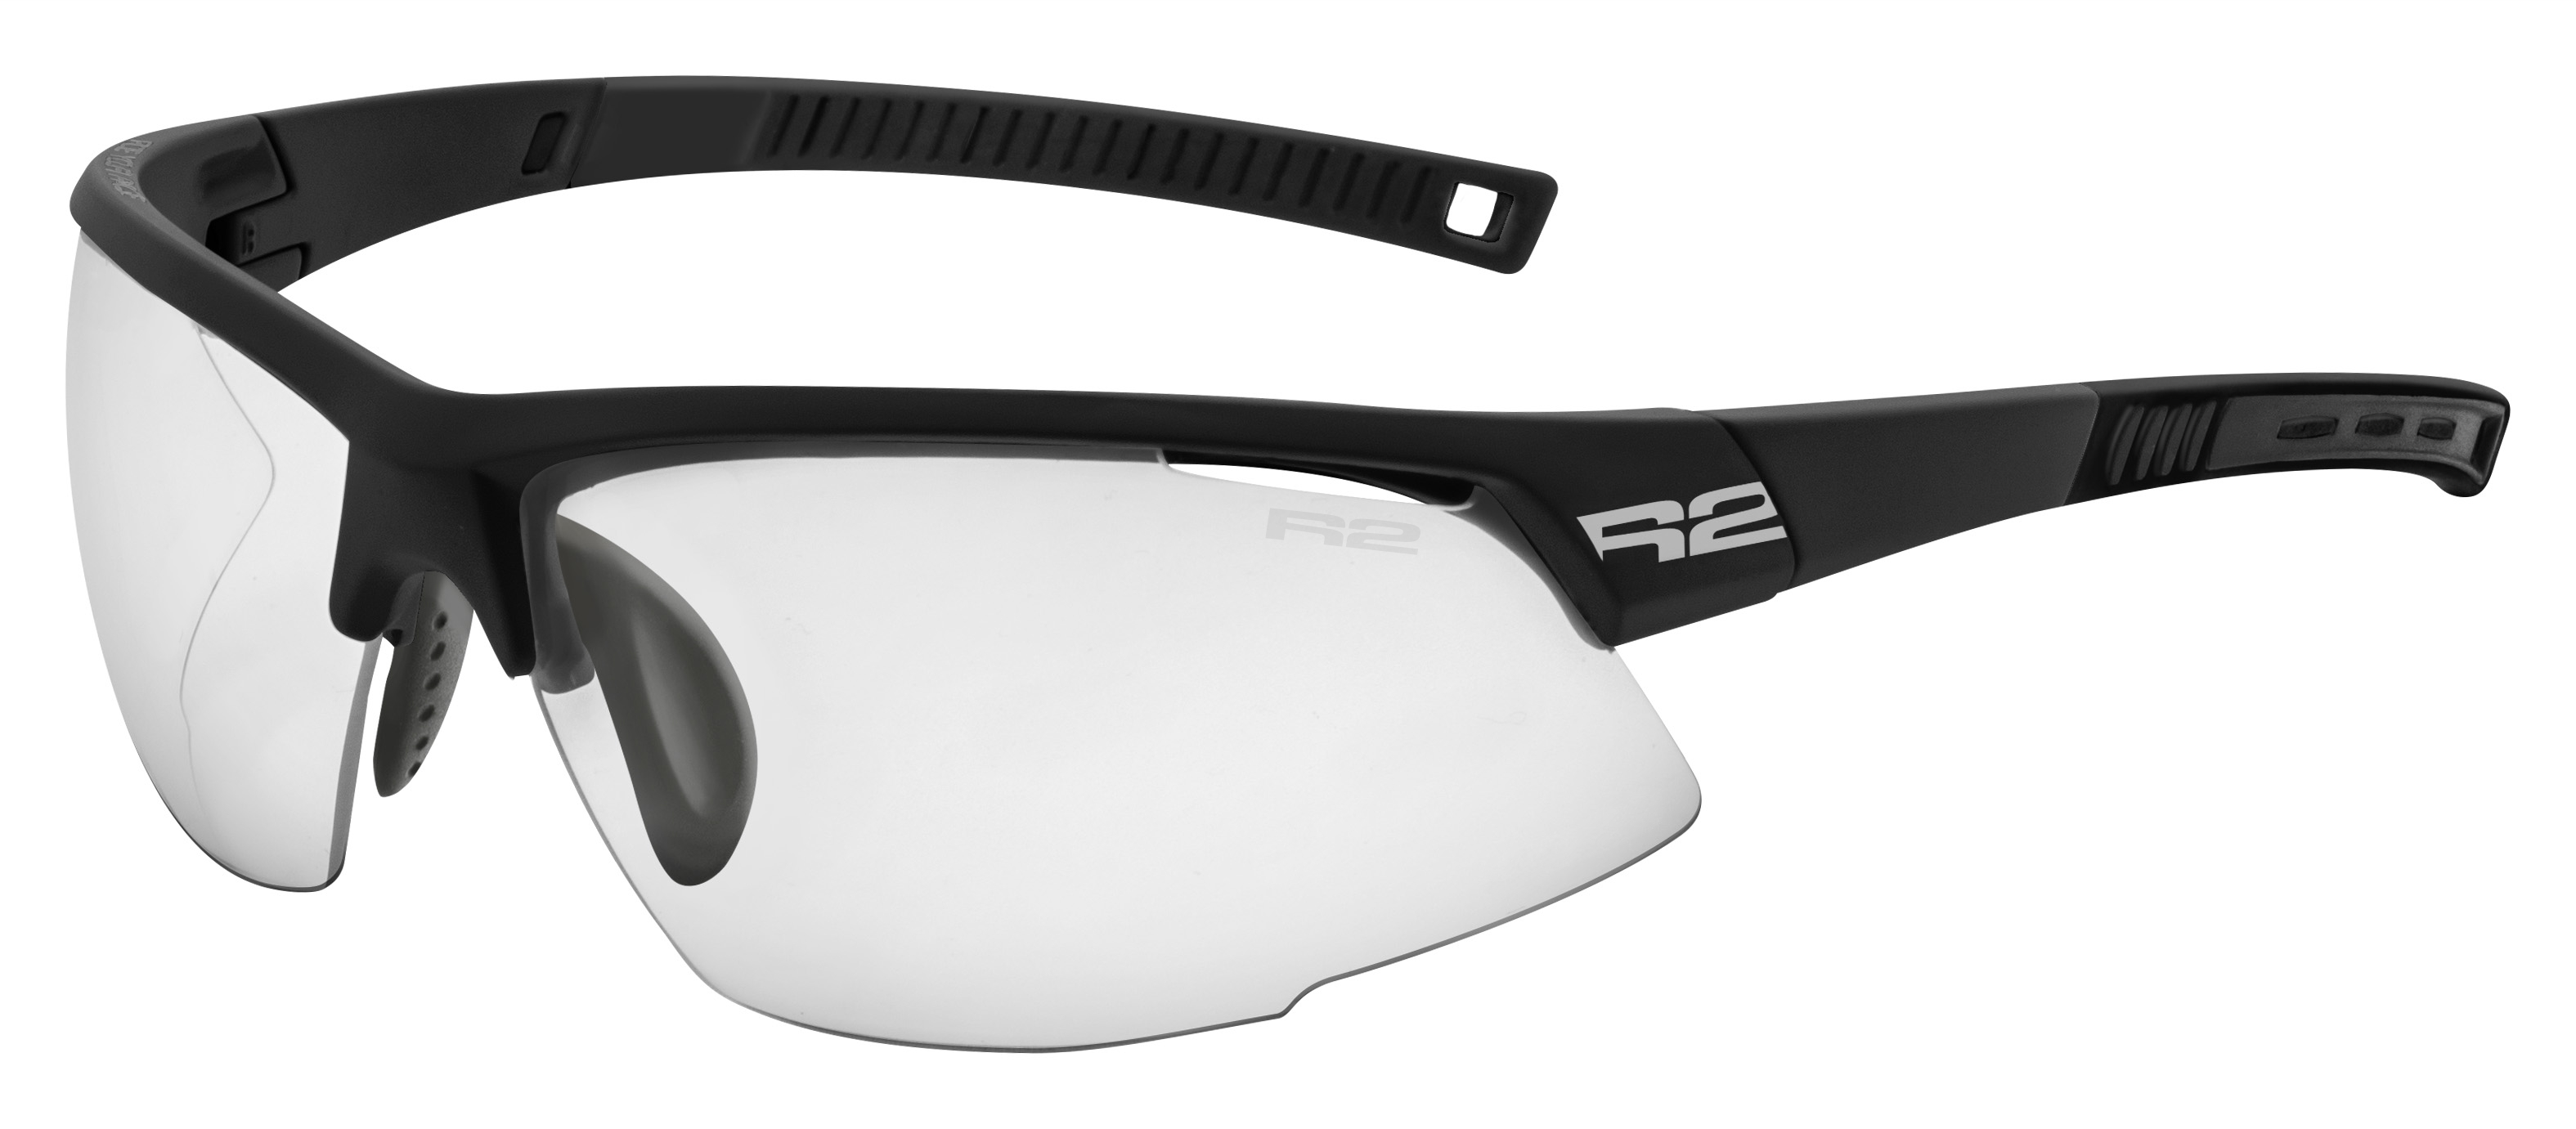 Photochromatic sunglasses  R2 RACER AT063A2 standard